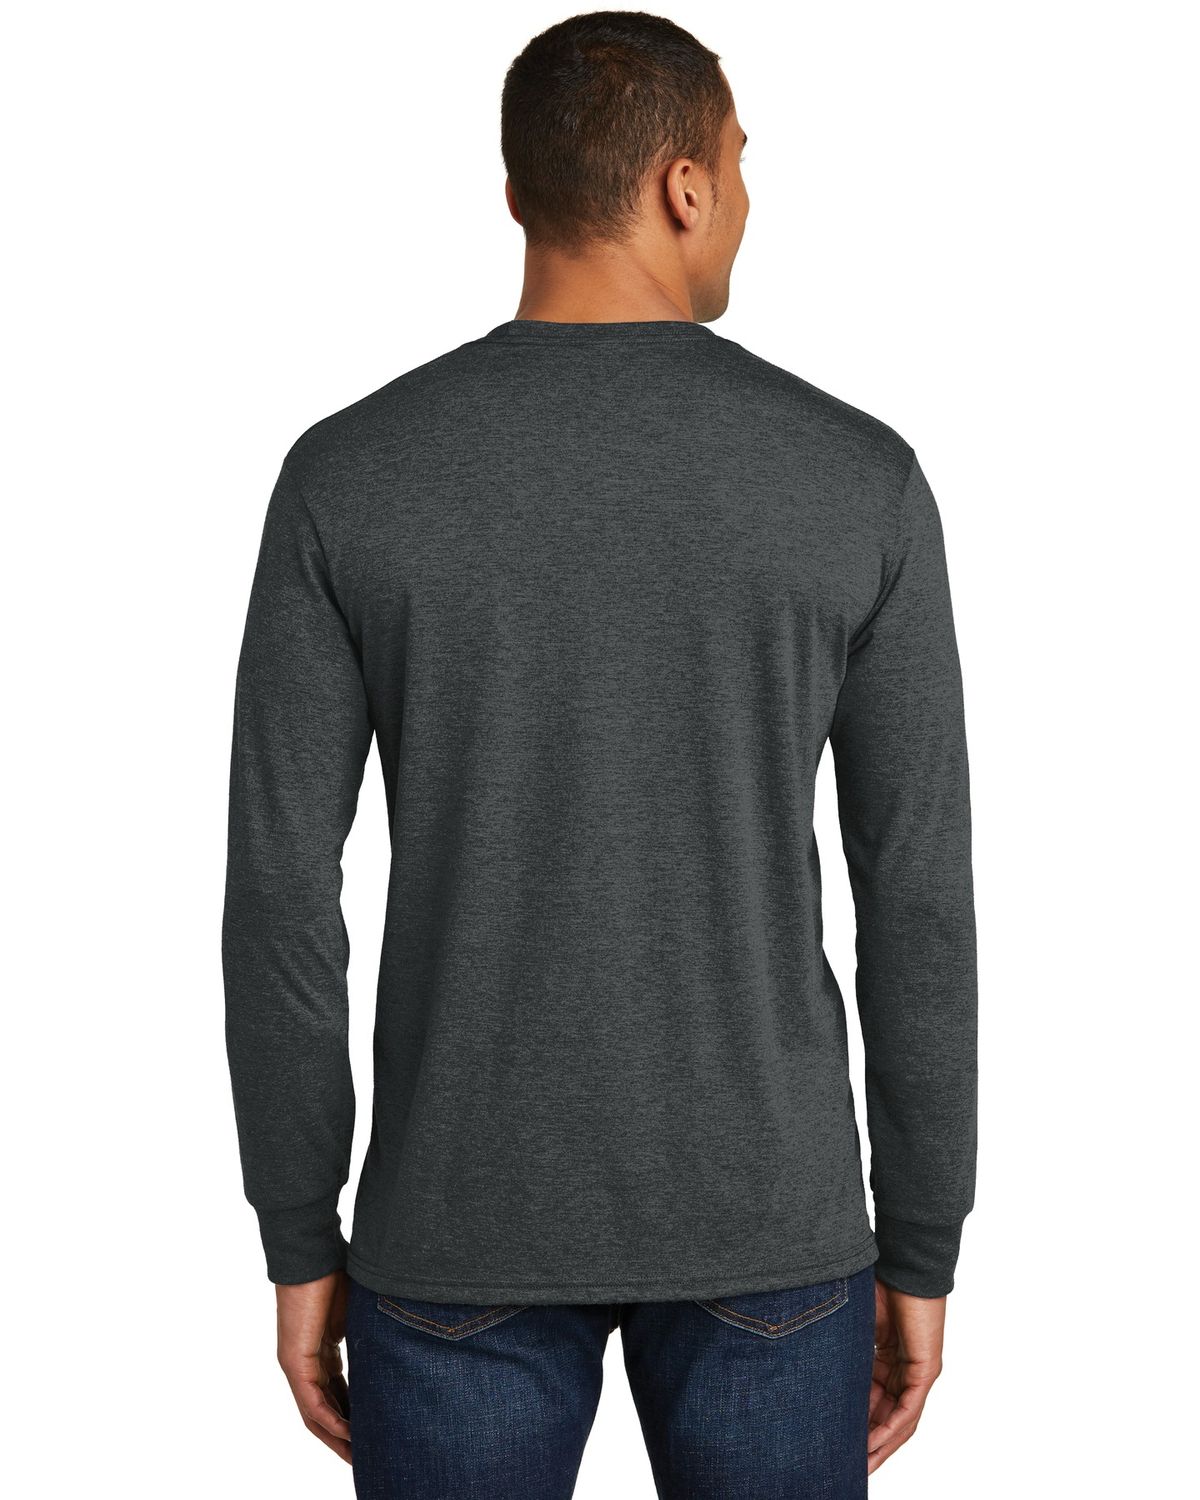 'District DM132 Perfect Tri Long Sleeve Tee '